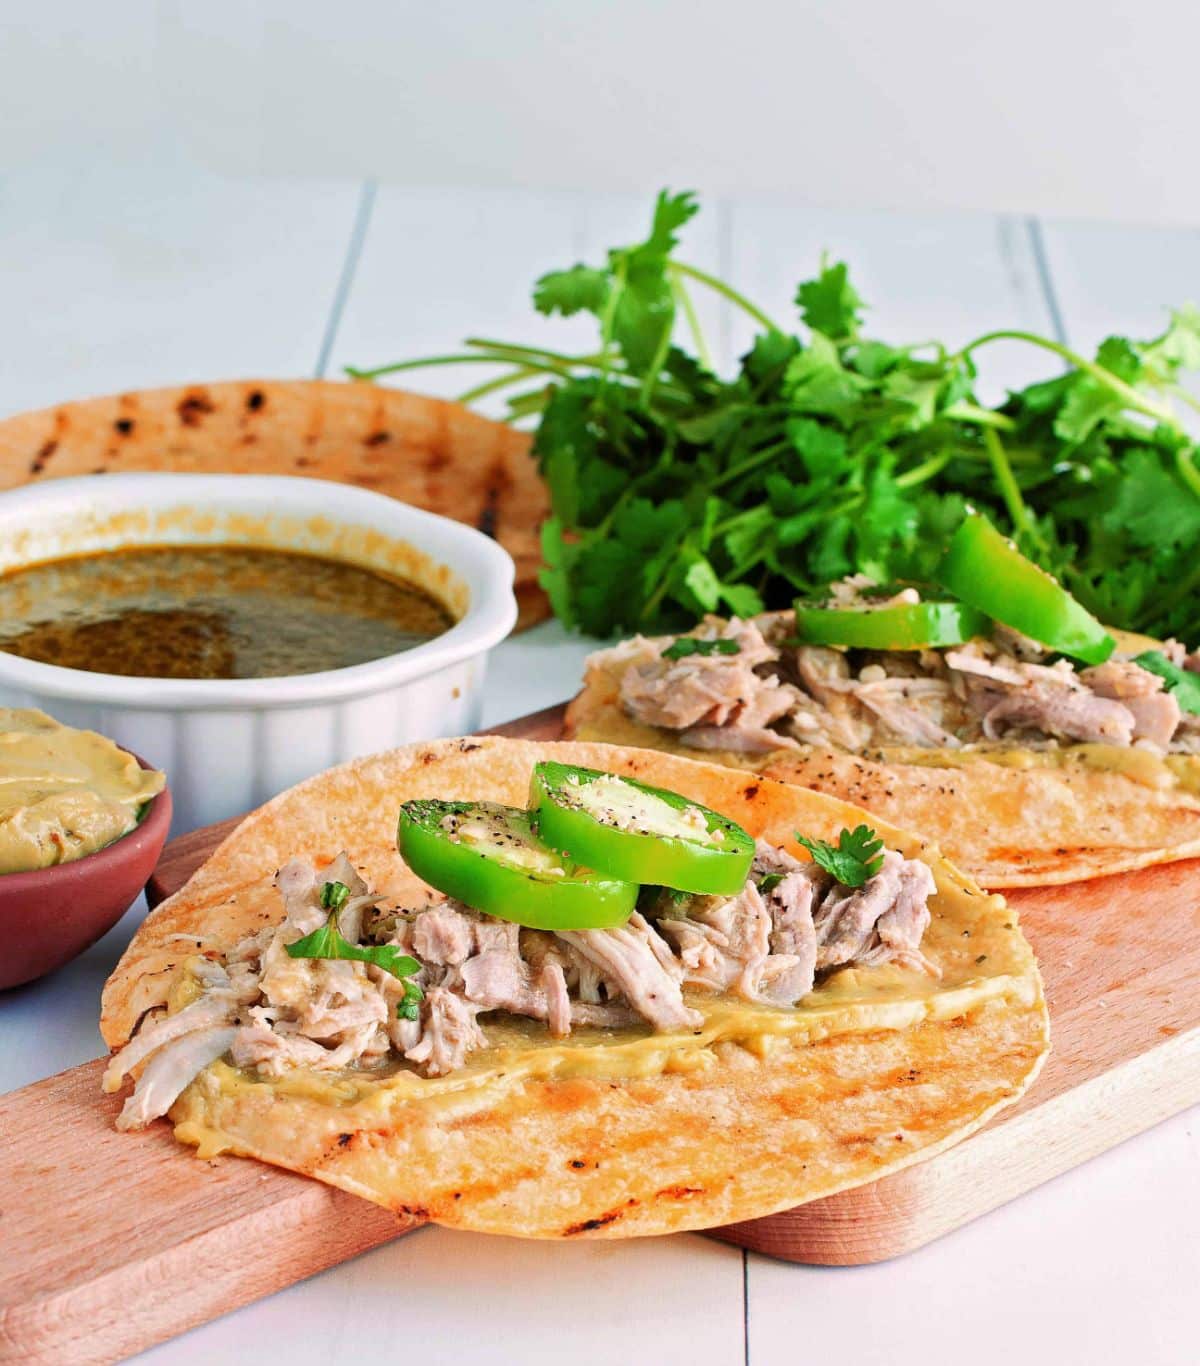 Mouth-watering Instant Pot Tomatillo Pork Tacos on a wooden cutting board.